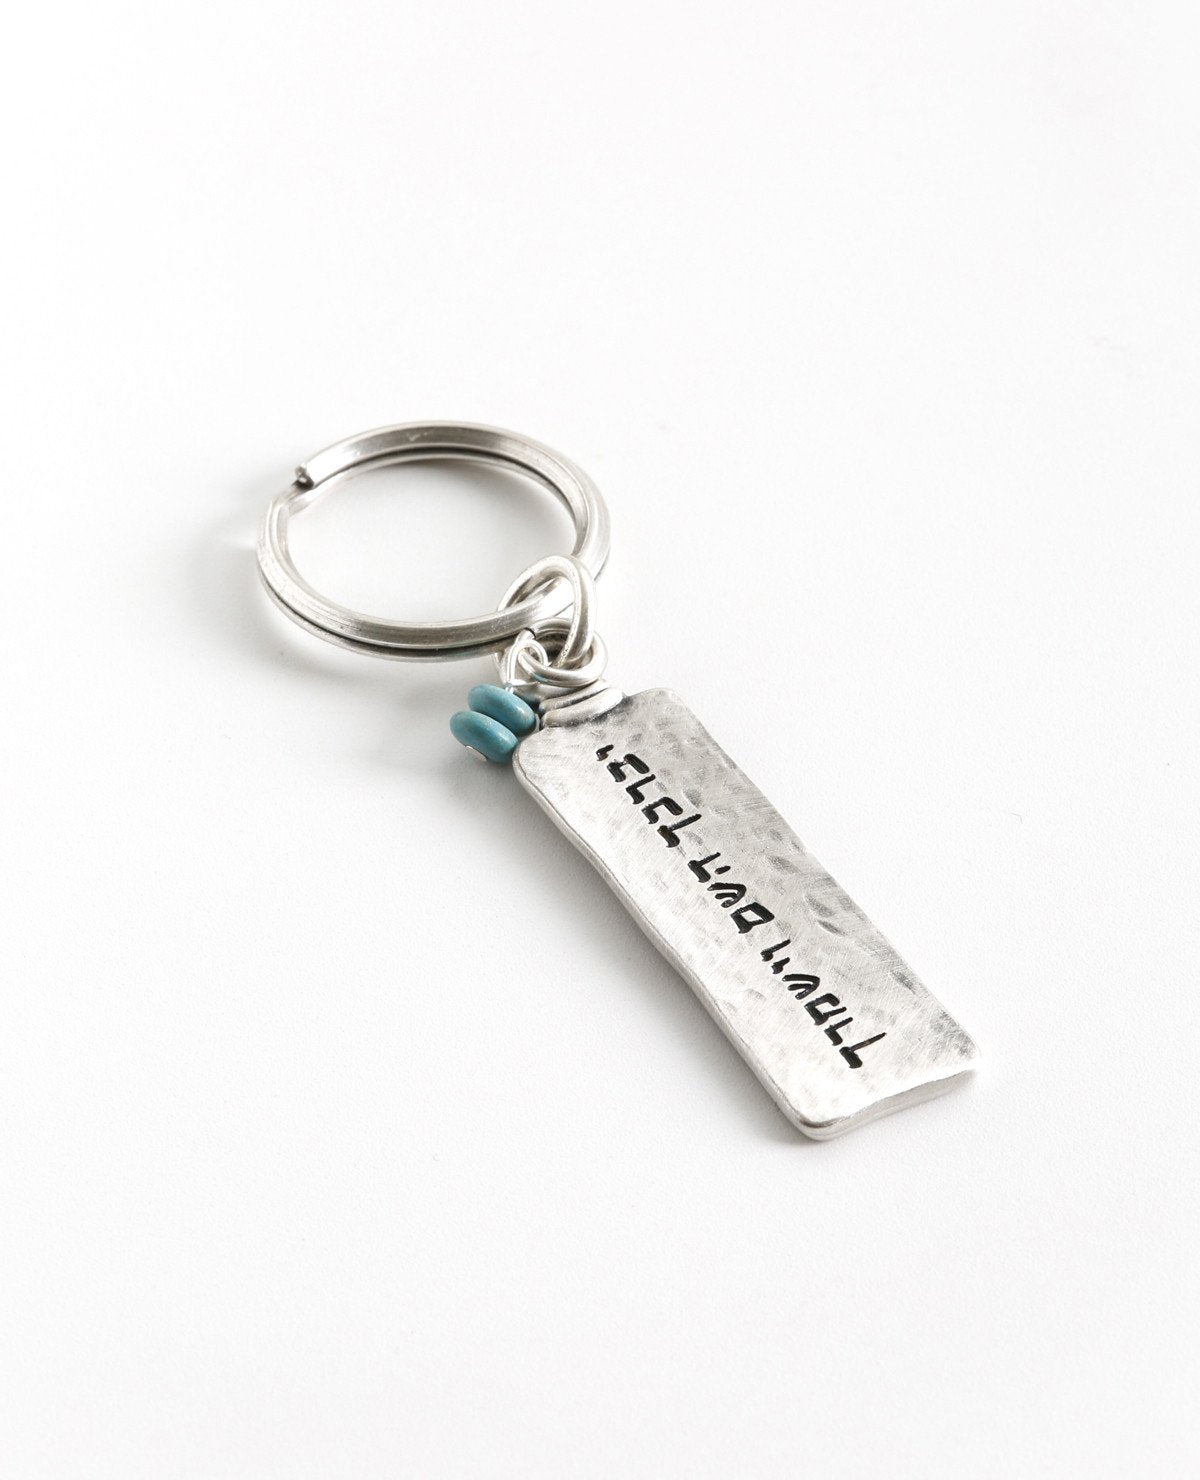 A keychain with a classic look, designed as a two-sided rectangular plate. Written on one side is the passage "May the Lord bless you and keep you safe", and on the other side appear decorations of good luck - a Star of David, a Hamsa with an eye, and a fish. In between the charms the words "Luck" and "Hamsa on you" are written. At the top of the rectangle hang two round turquoise colored stones, to complete the perfect look. 
The keychain is coated in sterling silver and is strong and reliable. 
A great pr